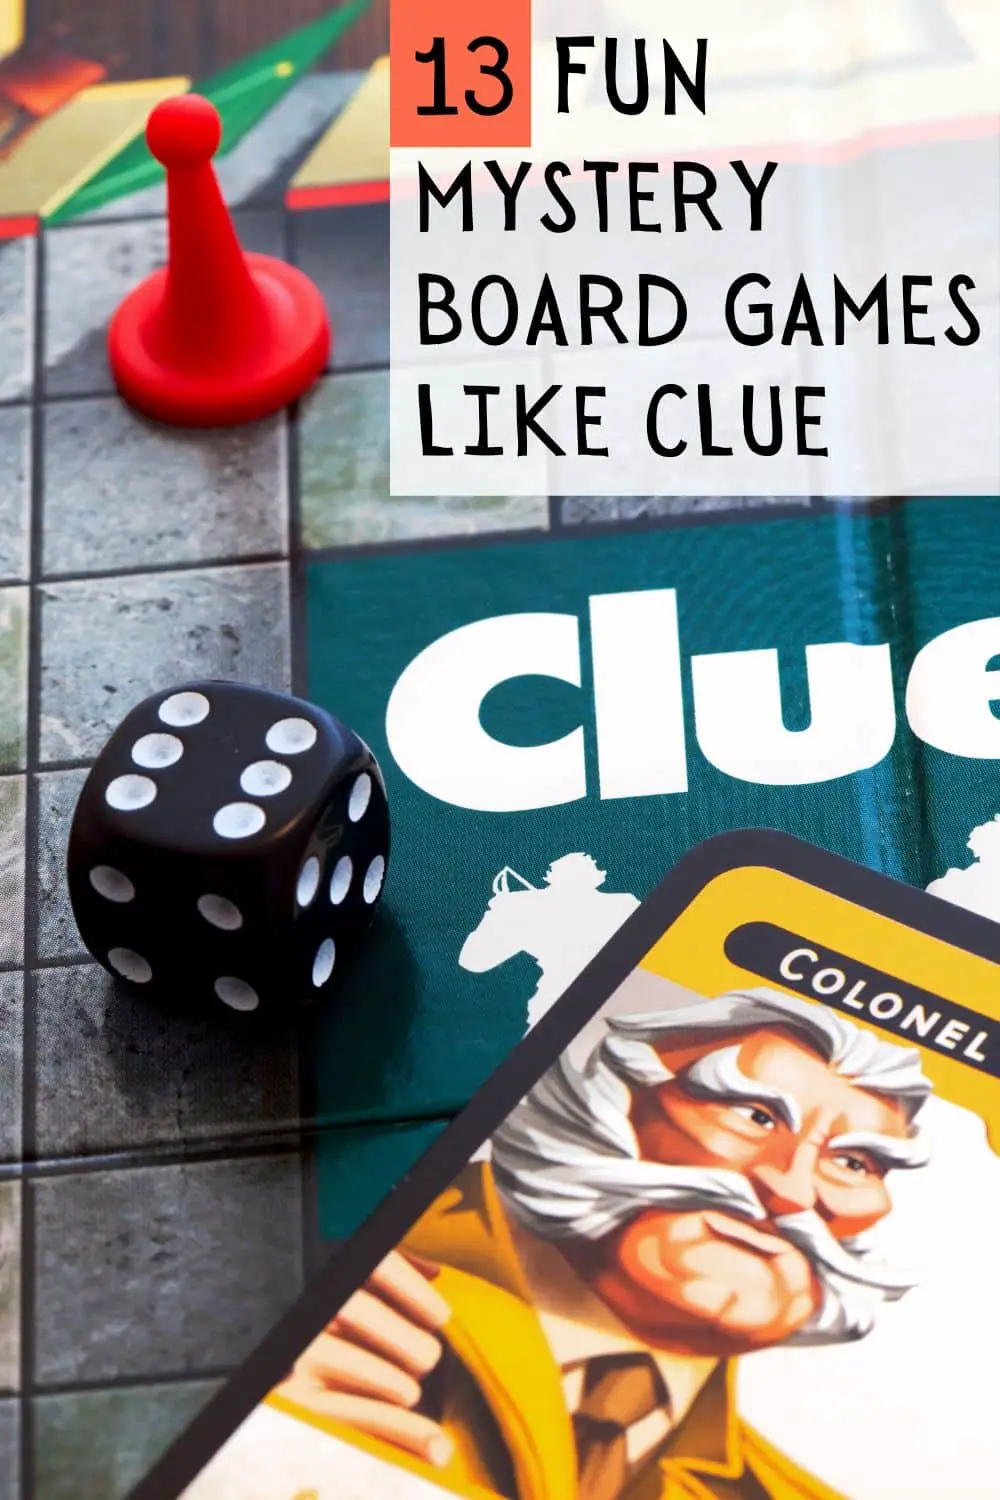 A closeup of a Colonel Mustard Clue card, a dice and a board game background with the text "13 mystery board games like clue."